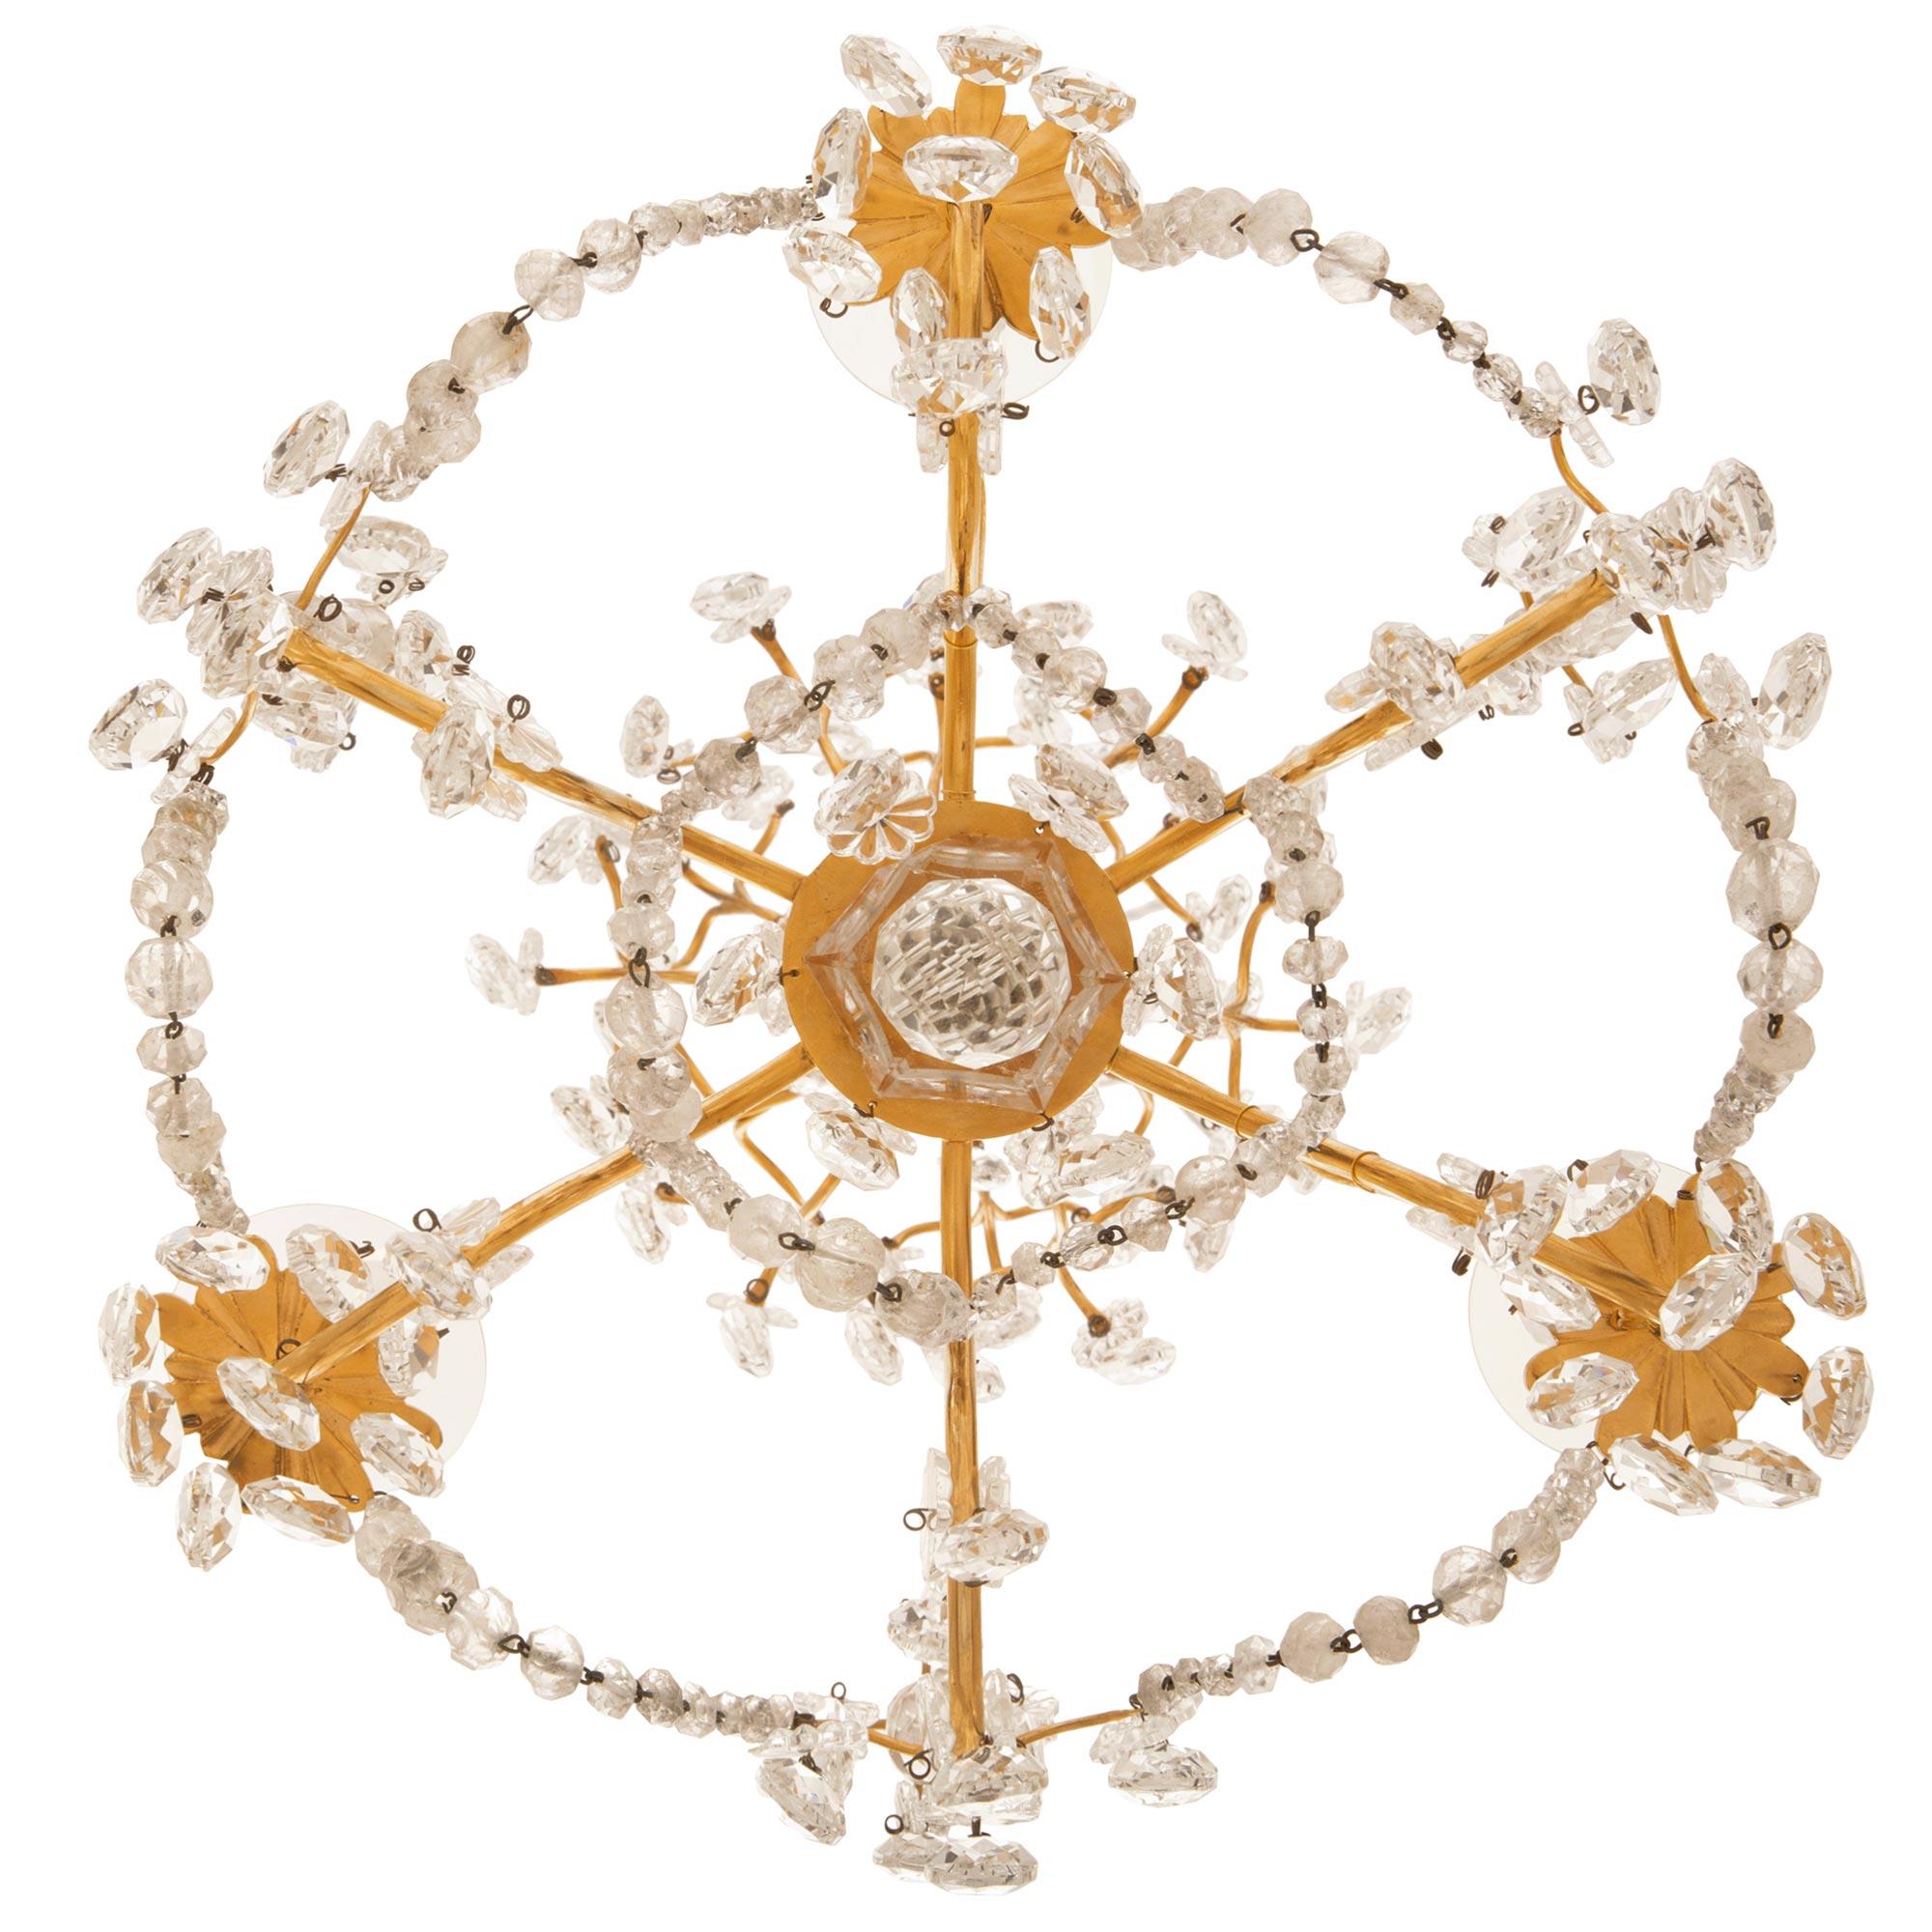 A charming and small scale French early 19th century Louis XVI st. Ormolu, Crystal and Rock Crystal chandelier. The six arm chandelier is centered by a fine bottom facetted cut crystal ball below a lovely Crystal fut from where the arm branch out.